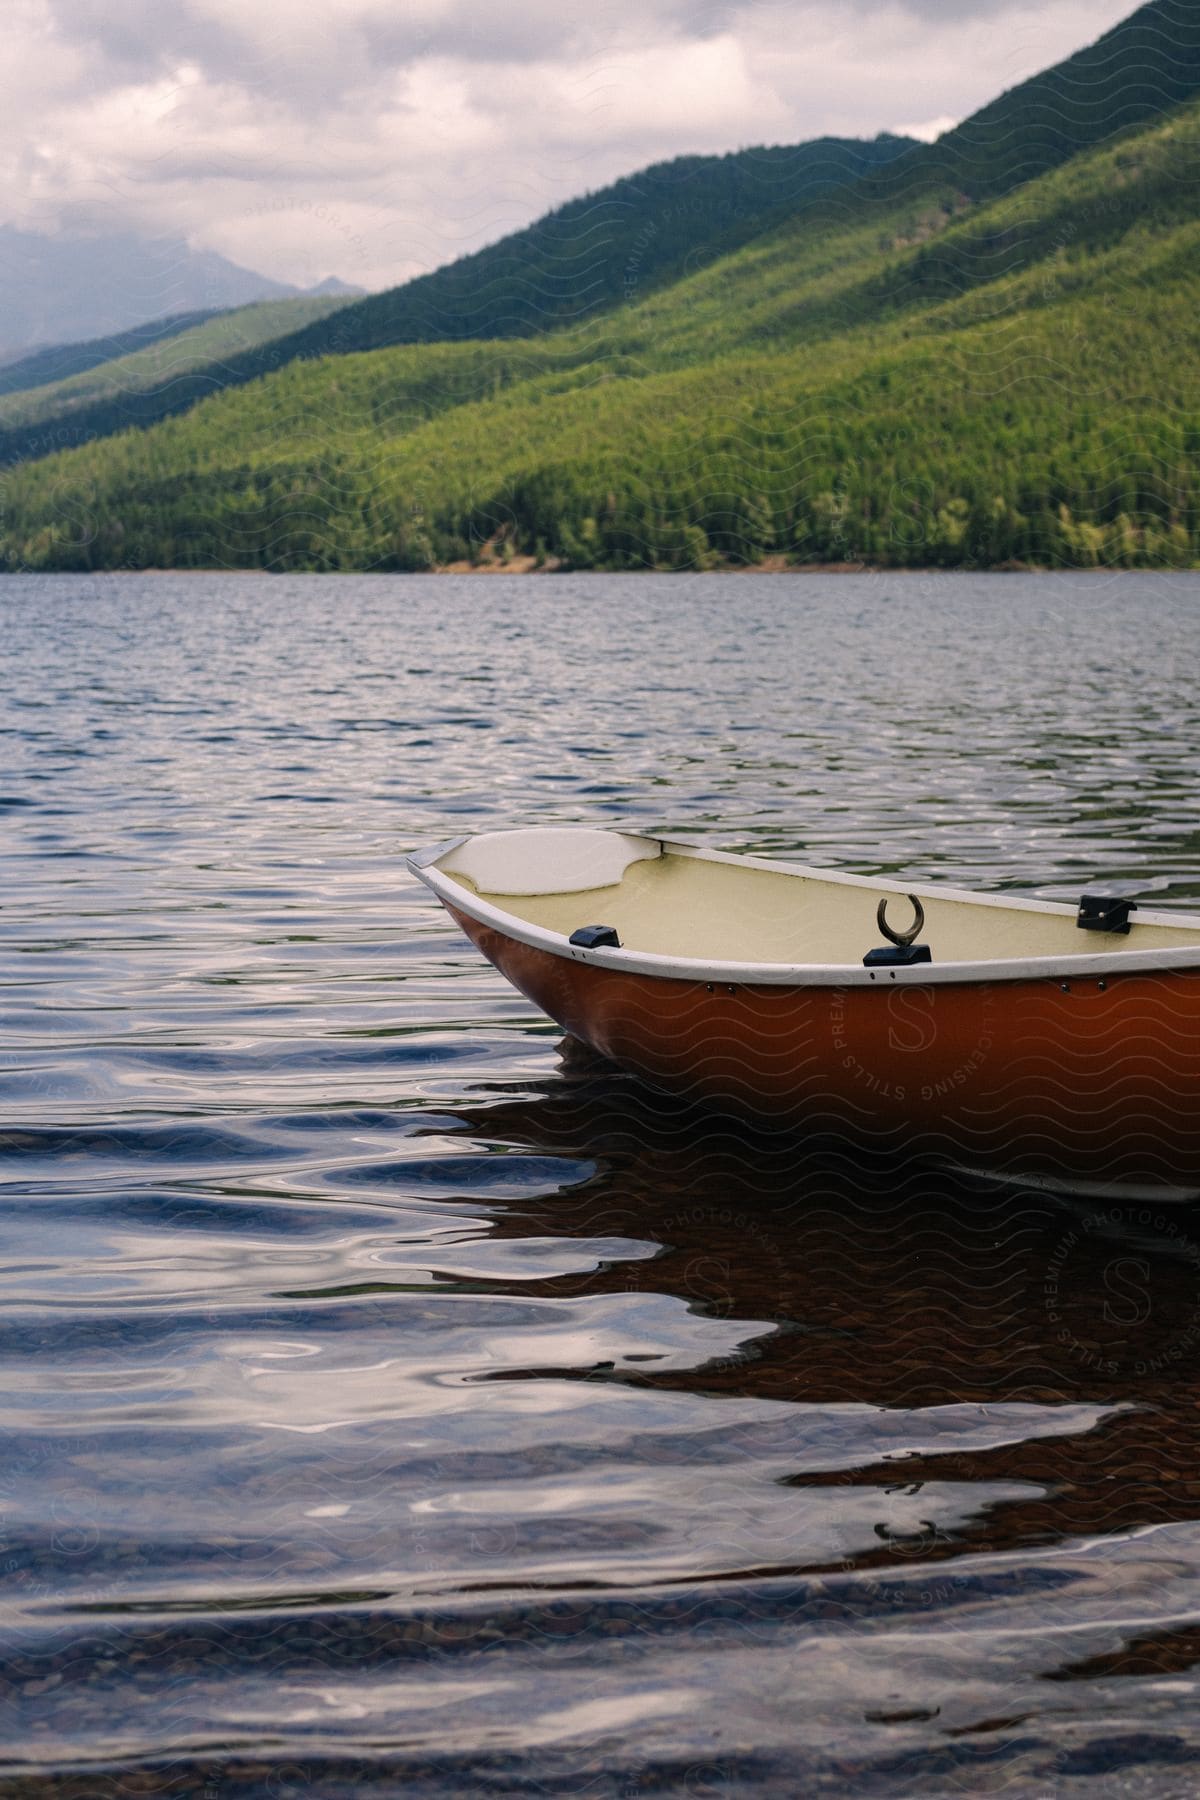 Canoe on a shallow lake with forested mountains on a cloudy day